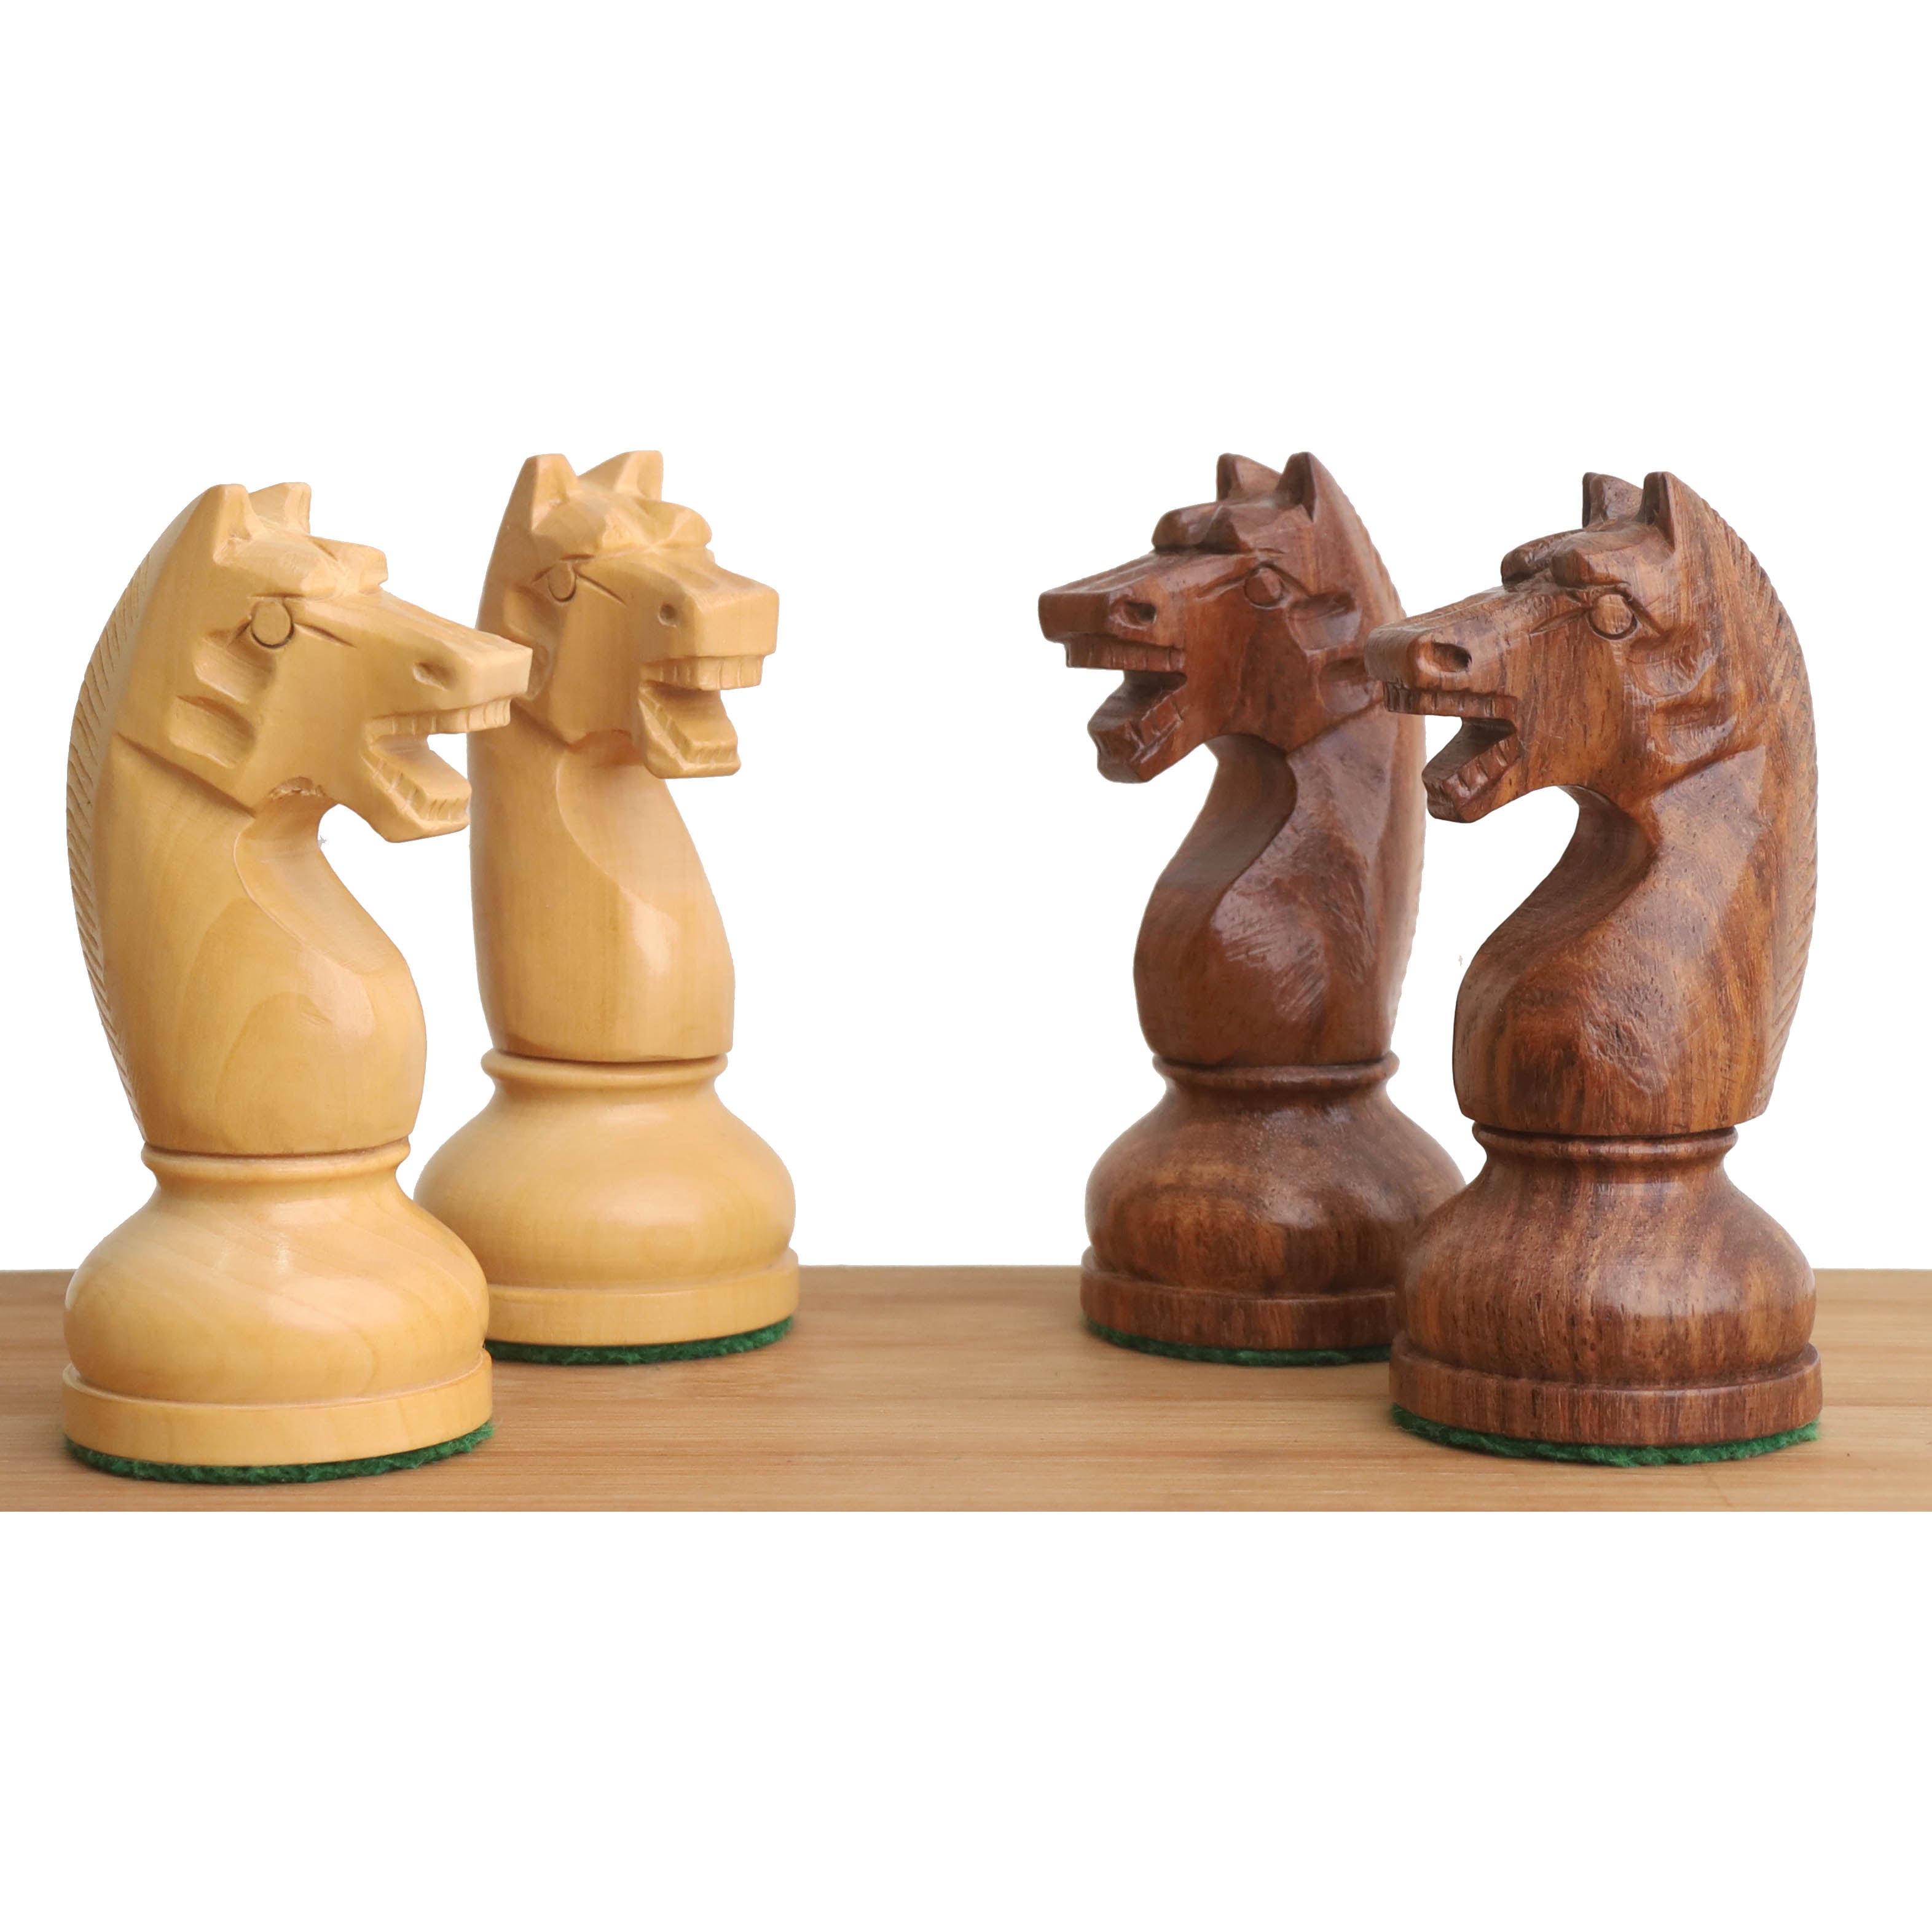 Slightly Imperfect 4.5" Soviet Russian 1960's Chess Pieces Only Set-Double Weighted Golden Rosewood